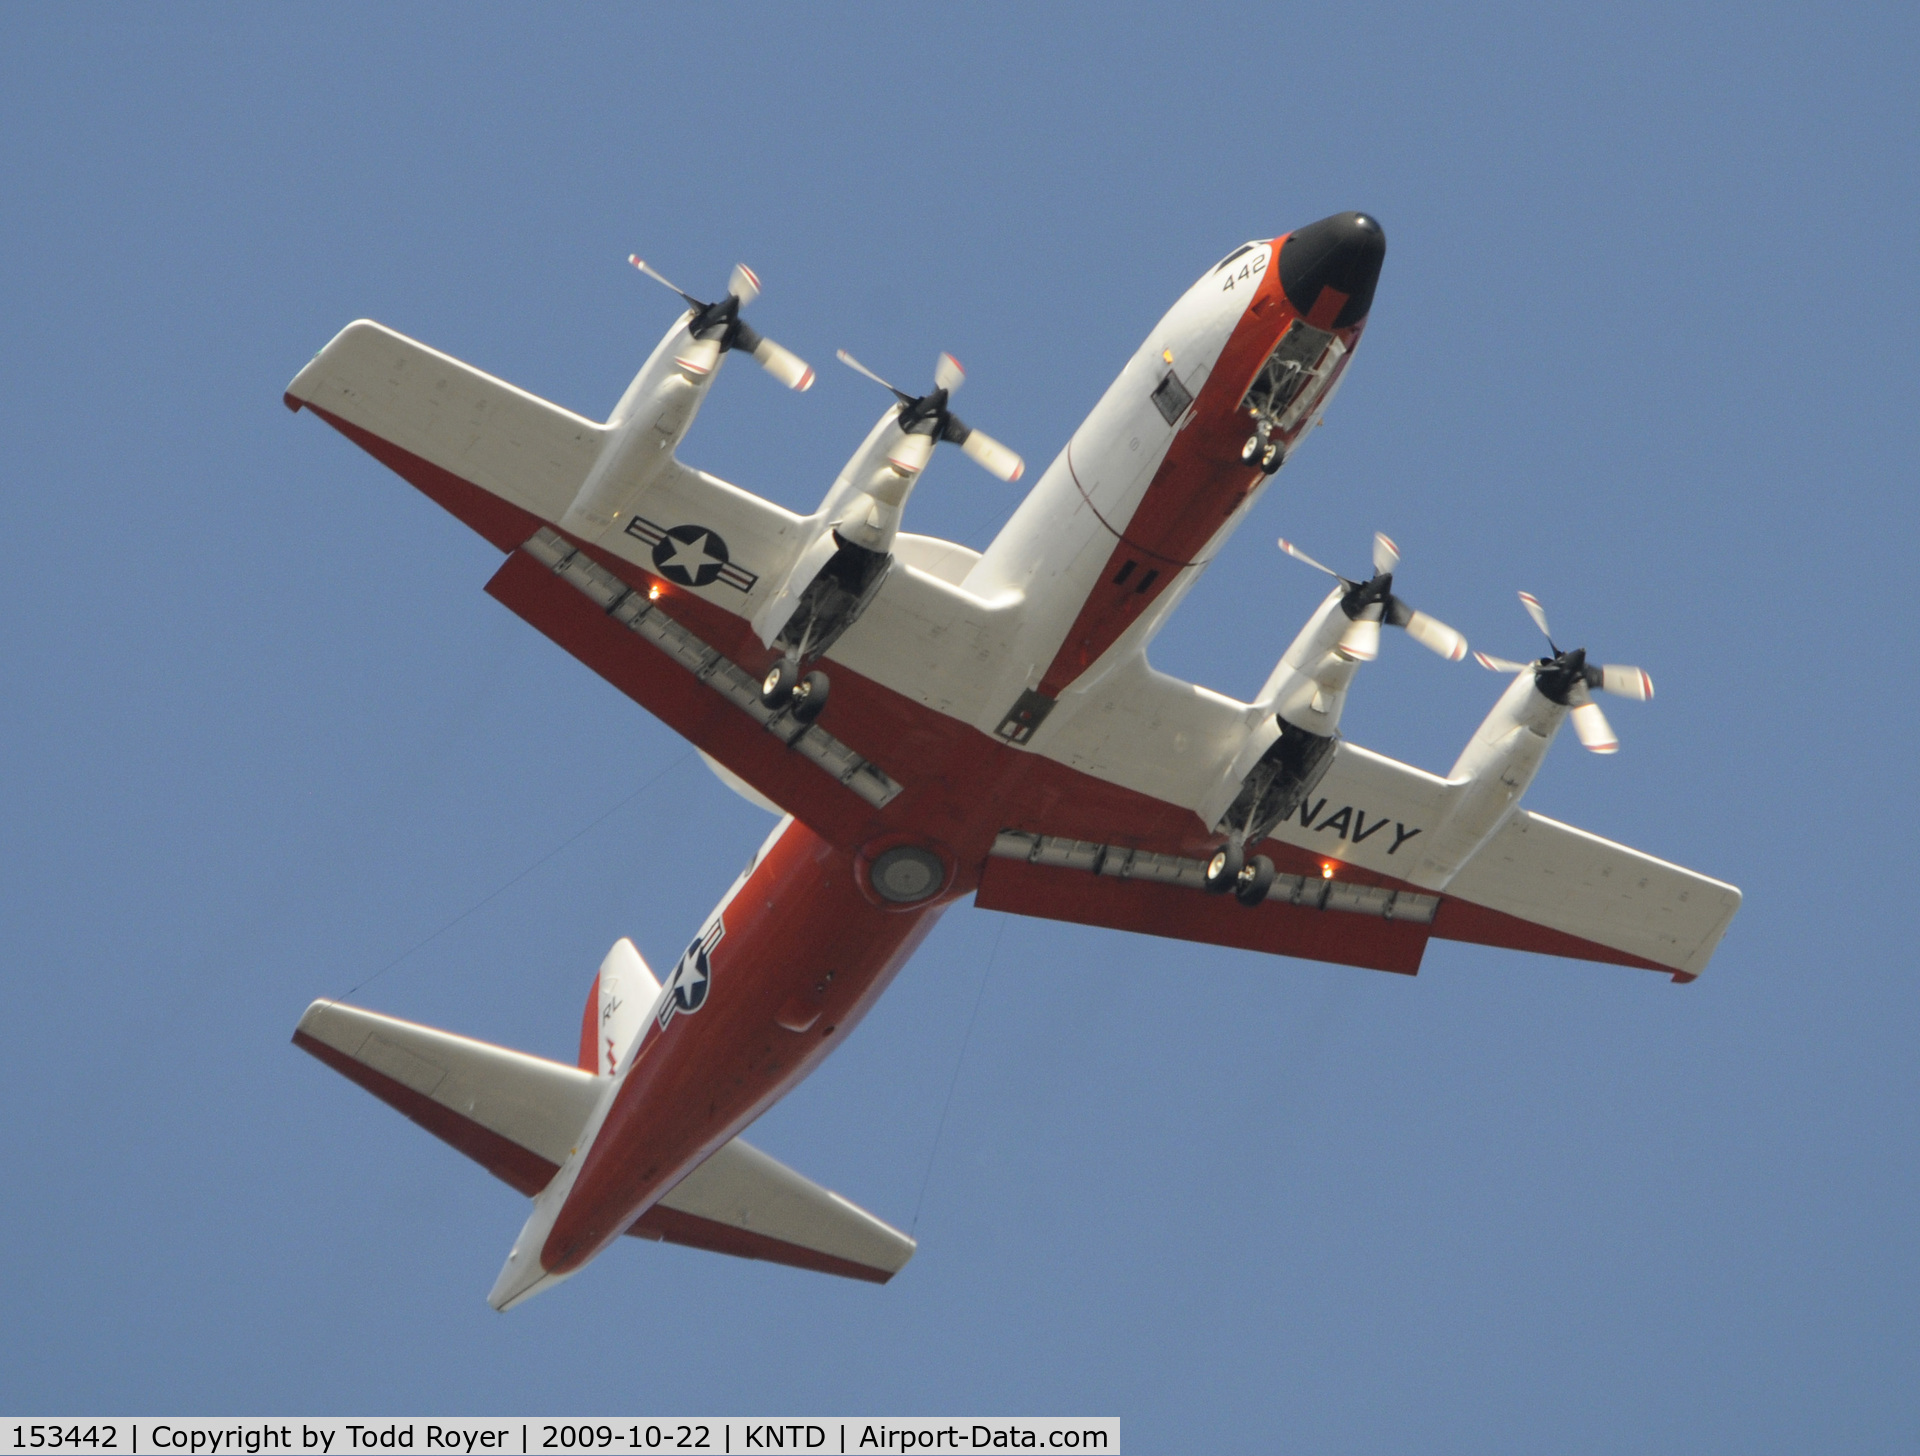 153442, Lockheed NP-3D Orion C/N 185-5239, From the backyard